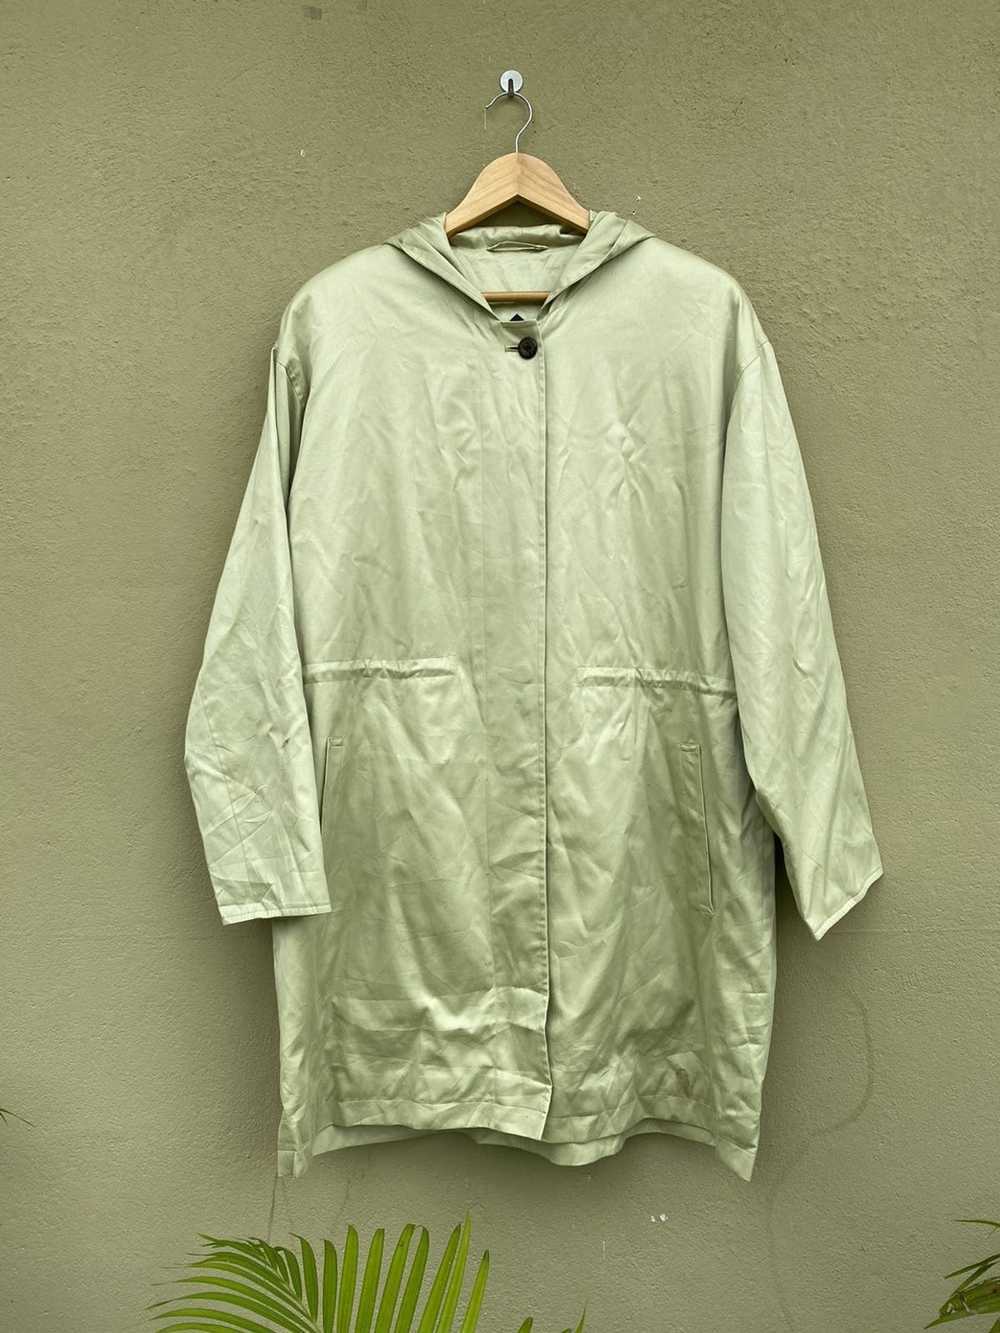 Burberry Sale ! BURBERRYS parka / trench coat nice - image 2